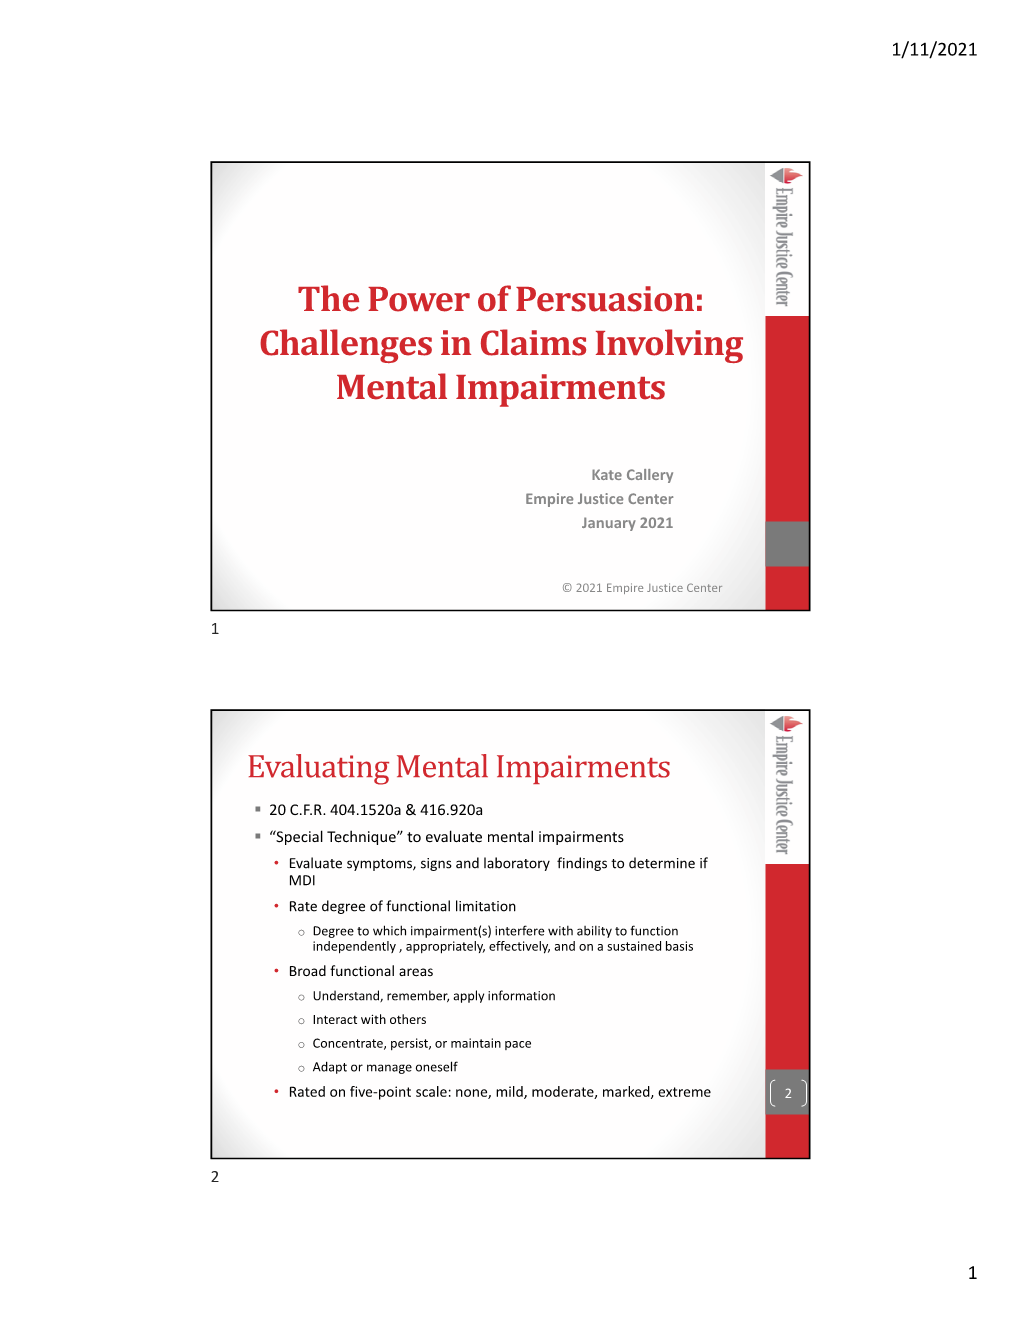 The Power of Persuasion: Challenges in Claims Involving Mental Impairments